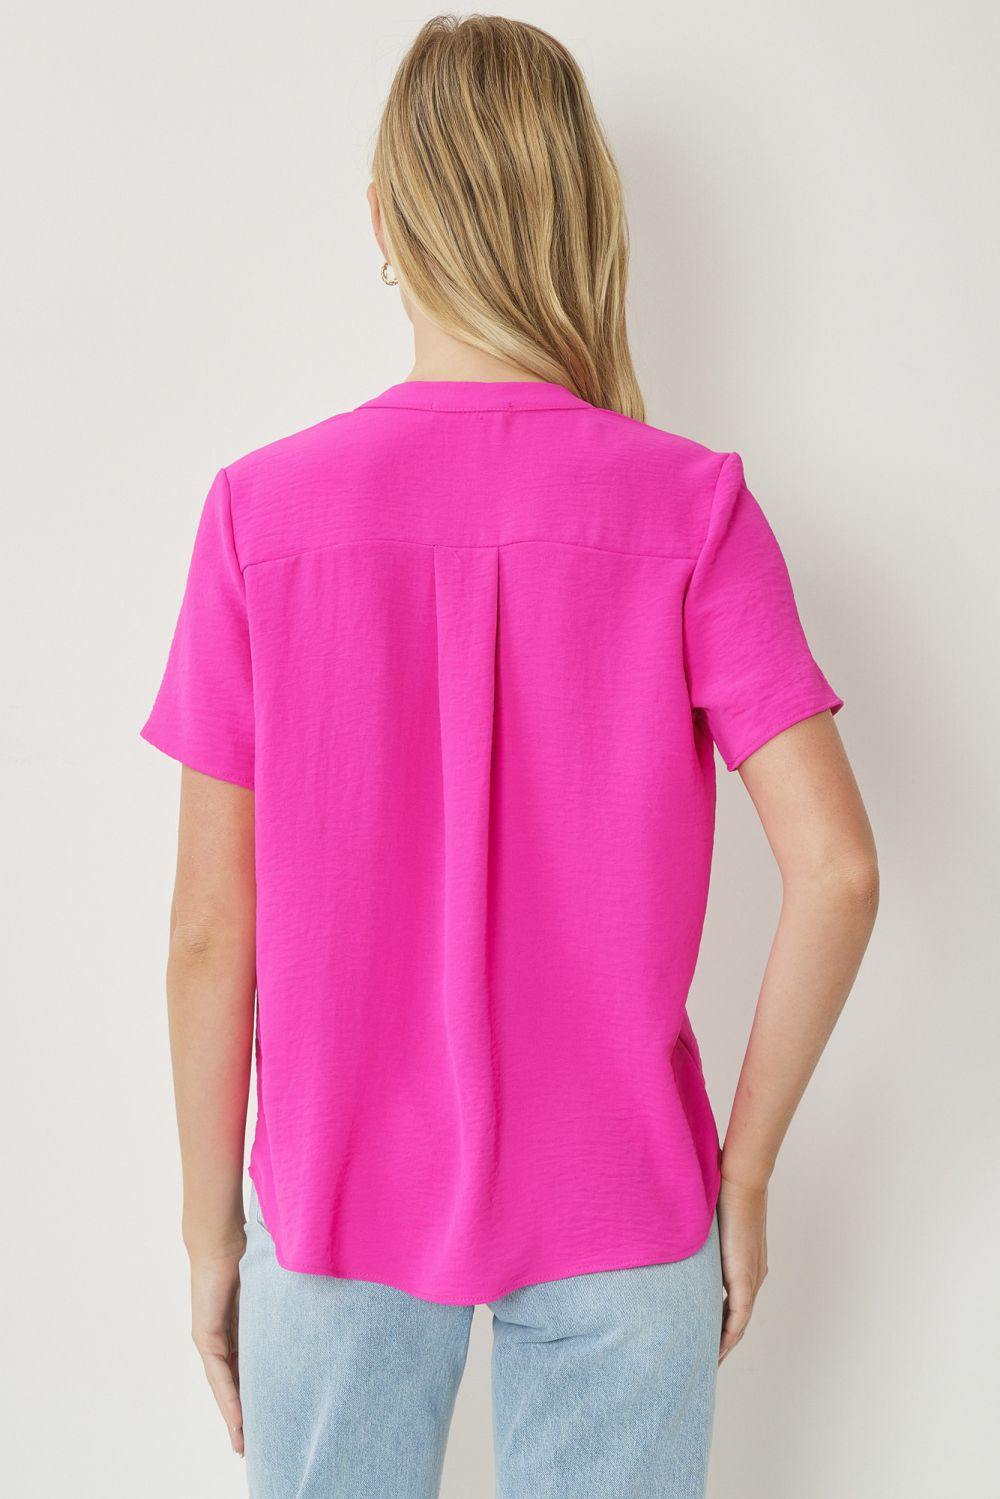 entro brand basic colorful tops Mock Collar Pleat Detailed pink